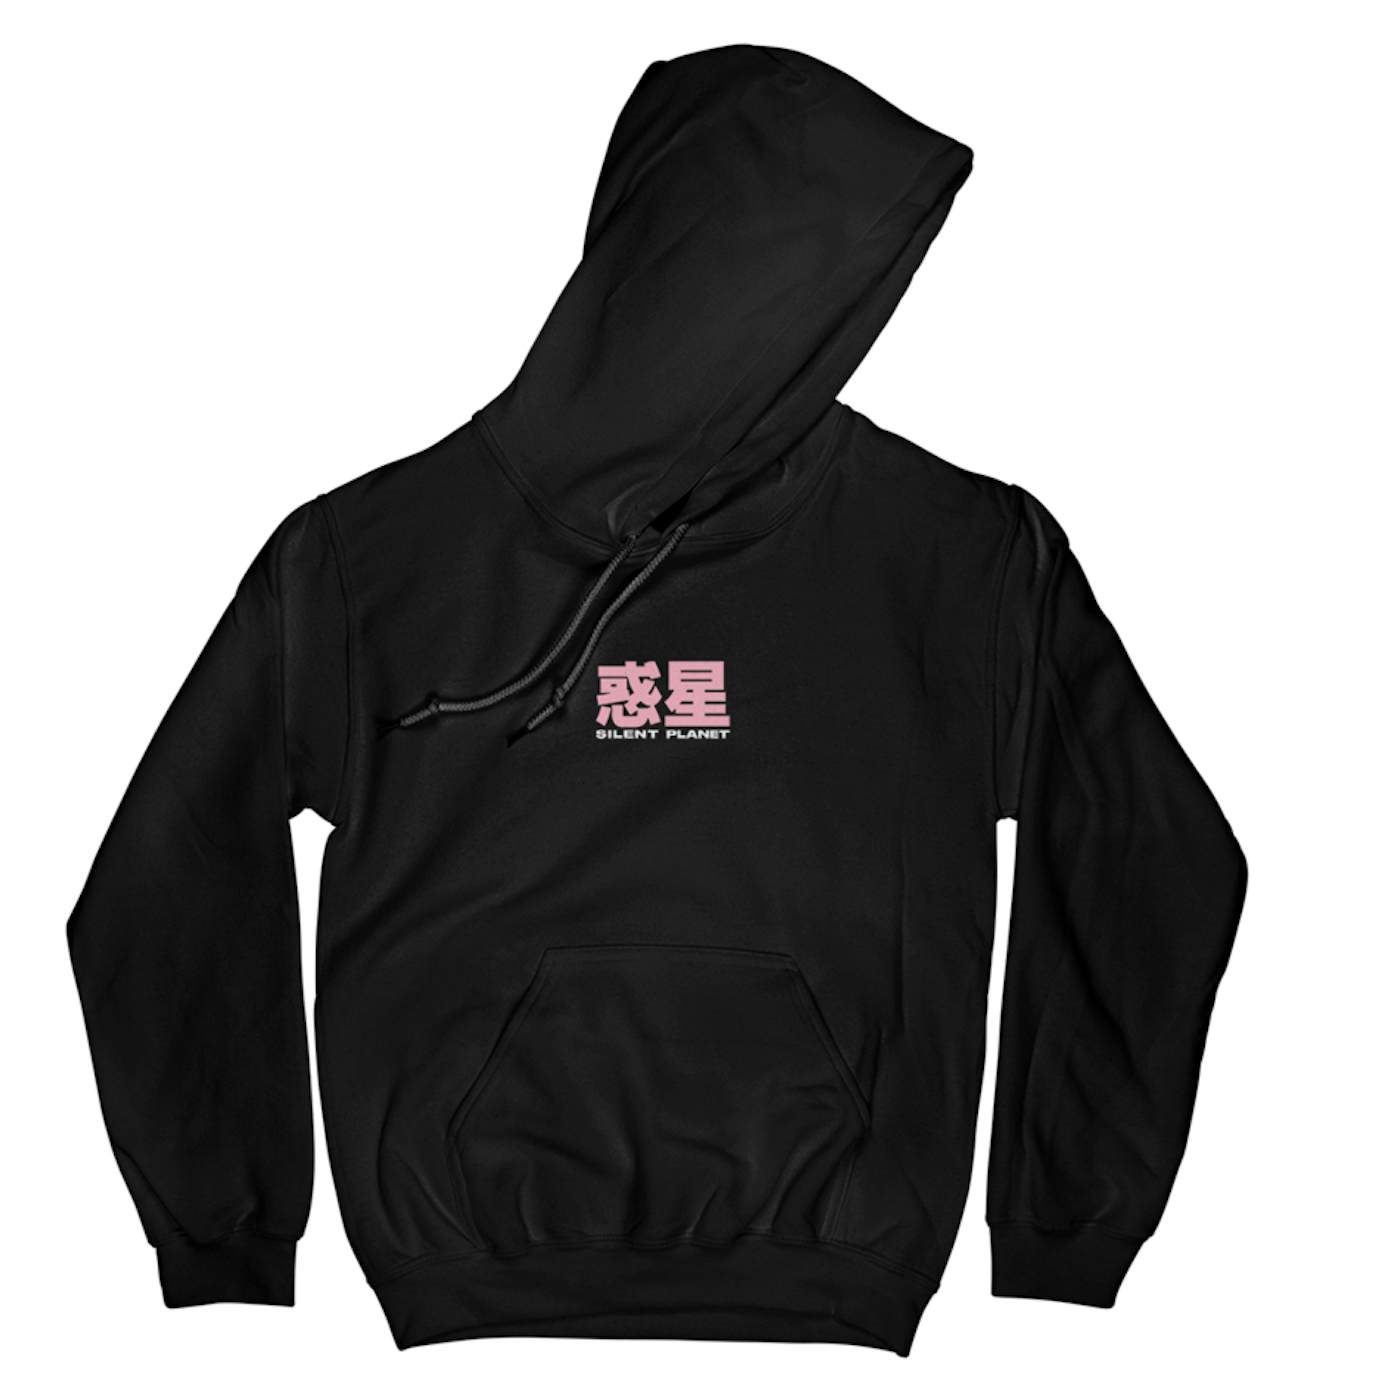 Silent Planet "Embroidered" Hoodie